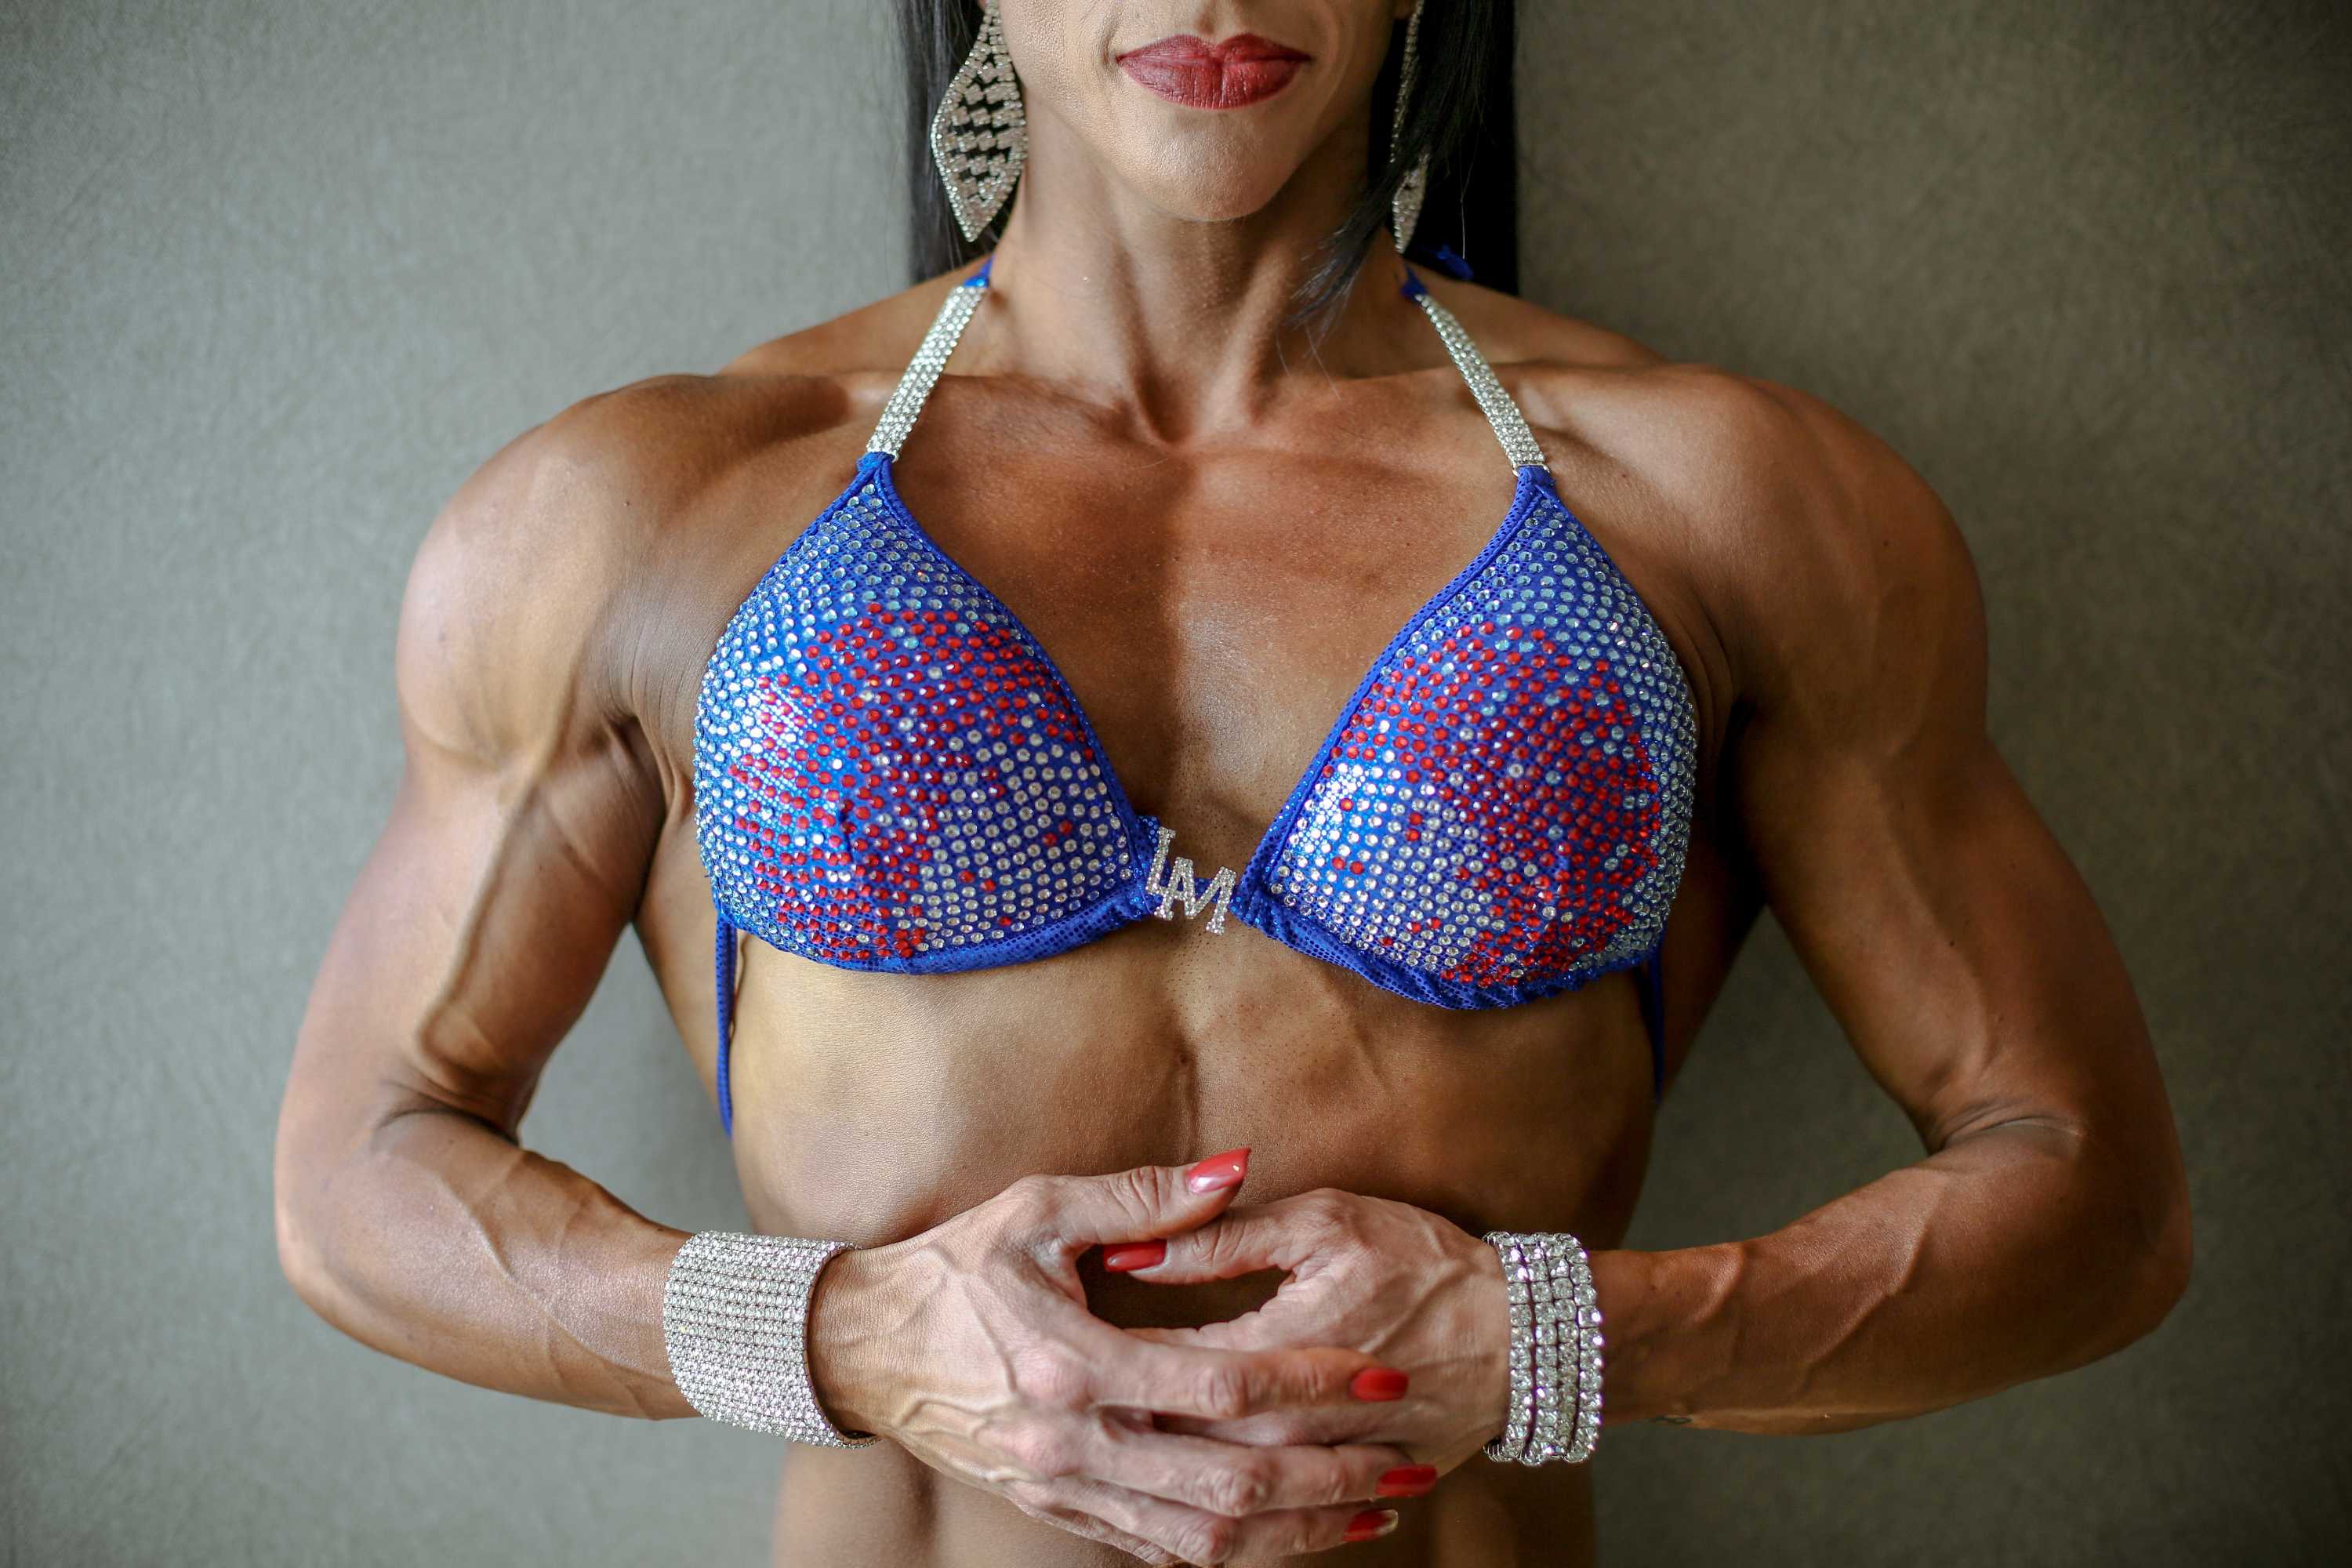 Bodybuilders can go to extremes to compete on stage — and its not always healthy pic